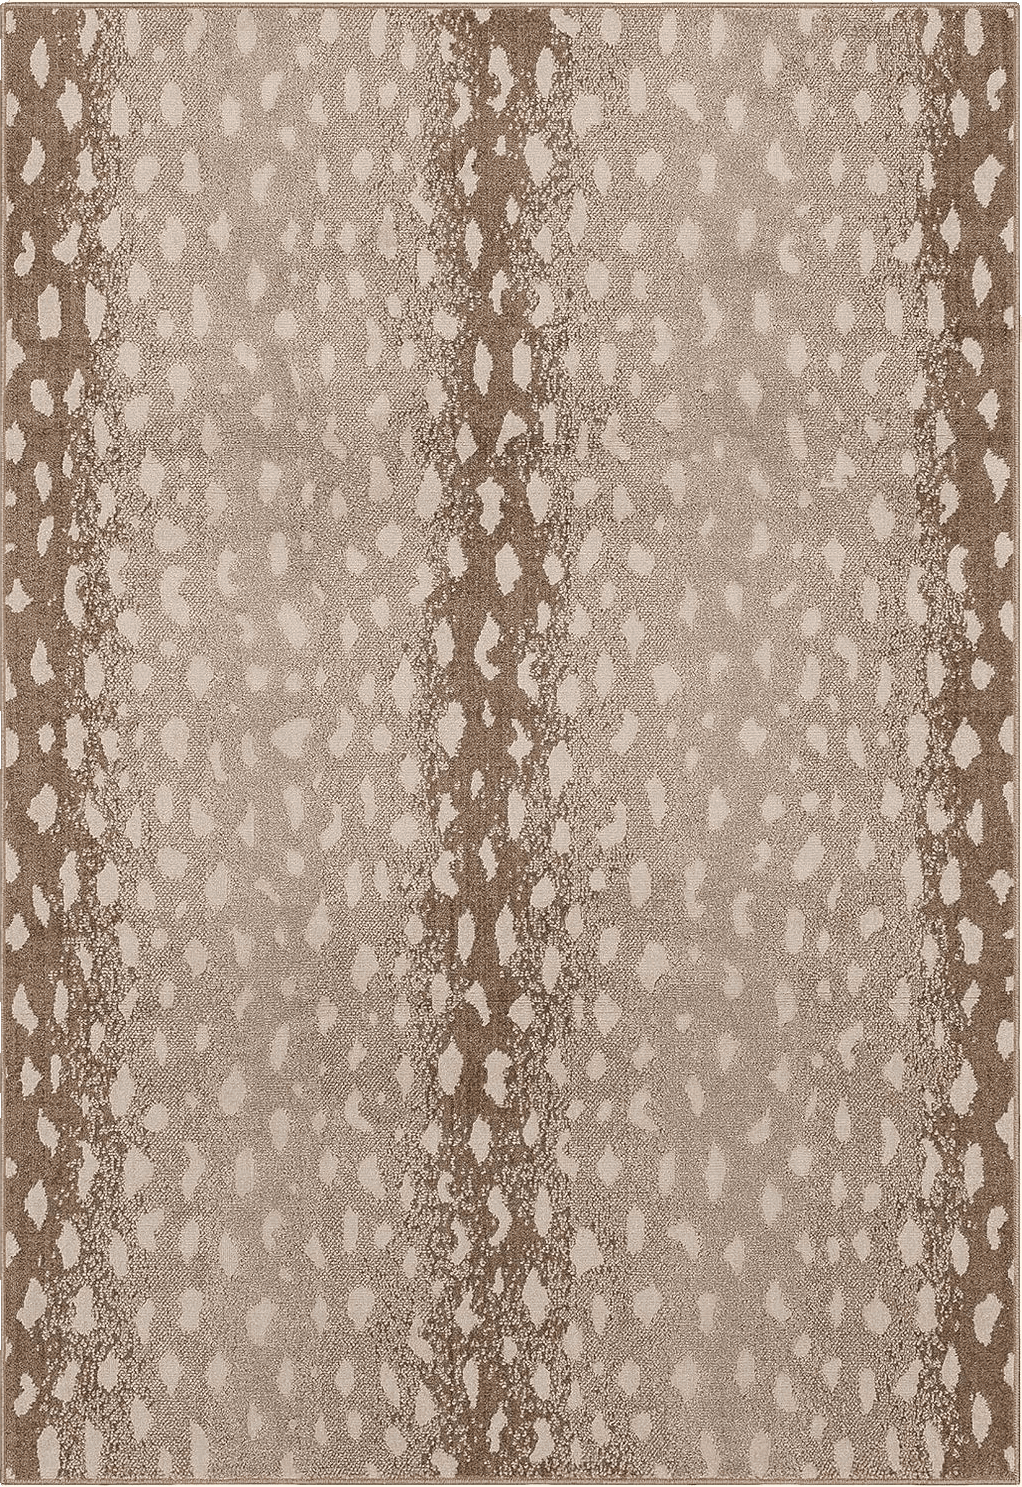 Antelope Mohawk Home Antelope Animal Print Beige 3' x 5' Area Rug Perfect for Kitchen, Living Room, Dining Room